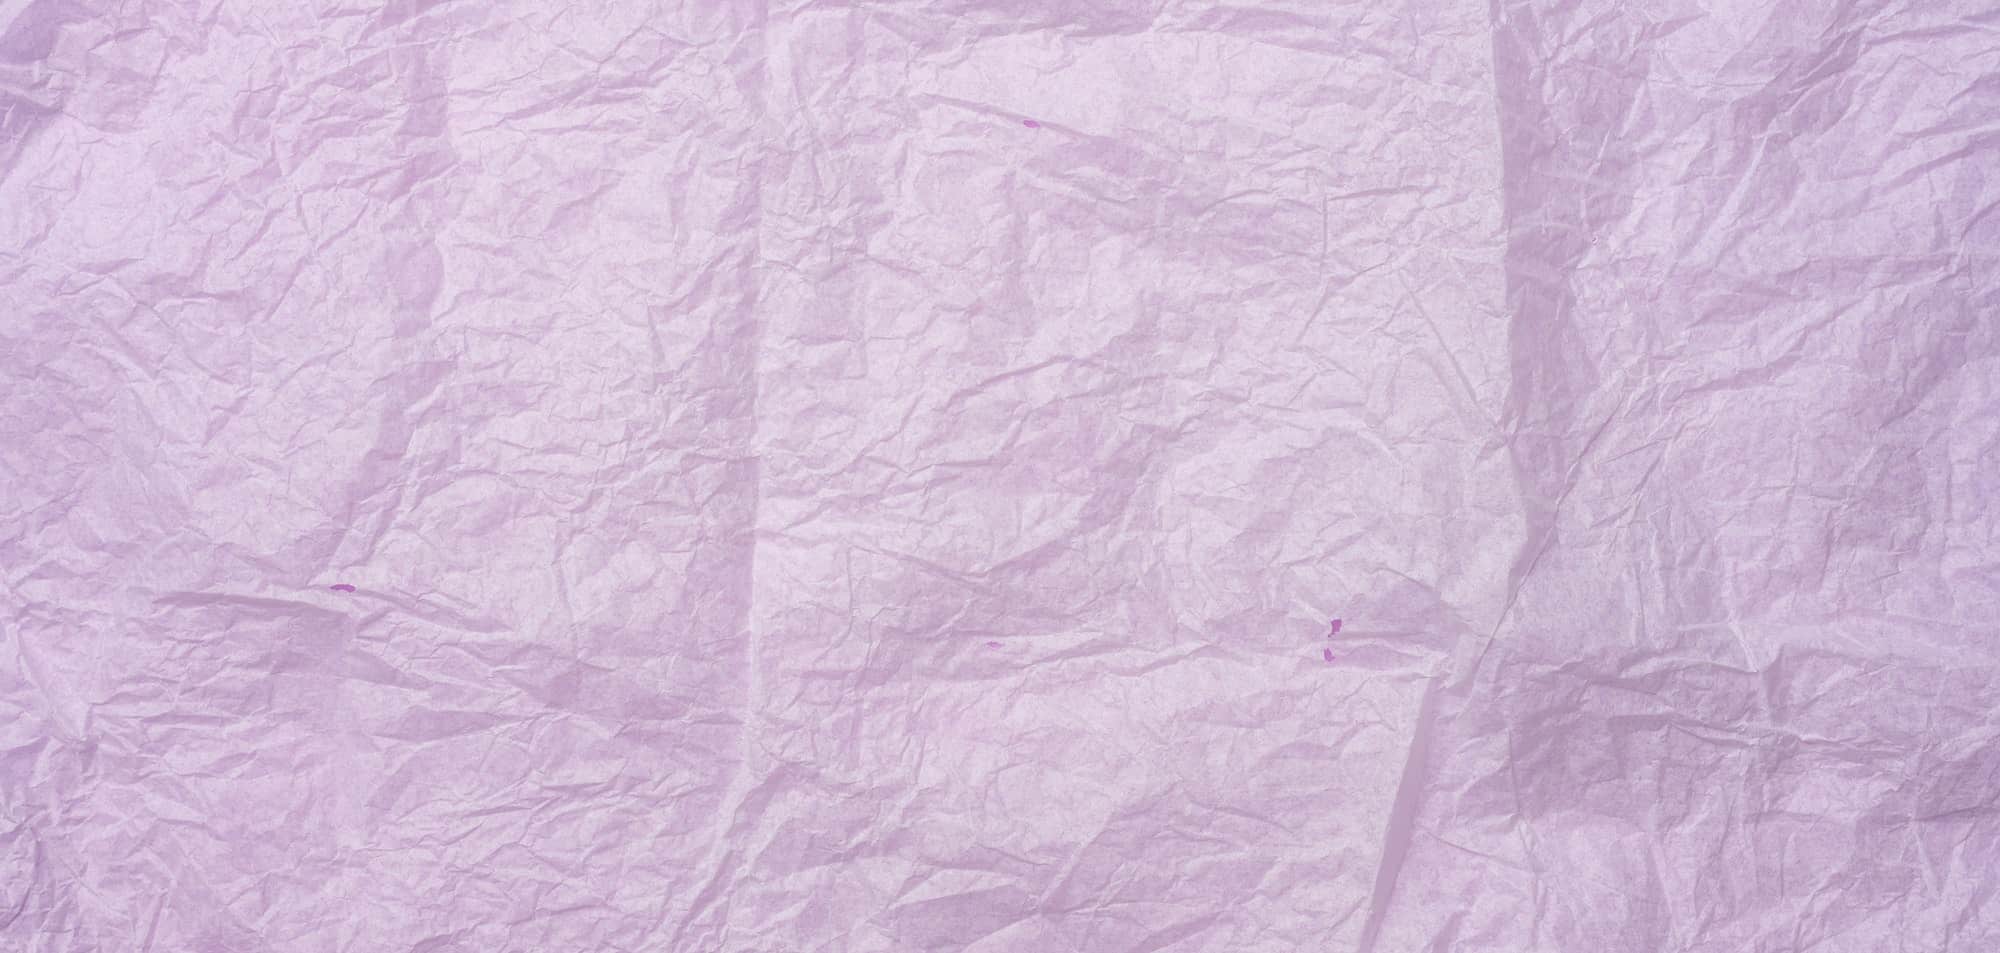 Crumpled pink tissue paper, full frame